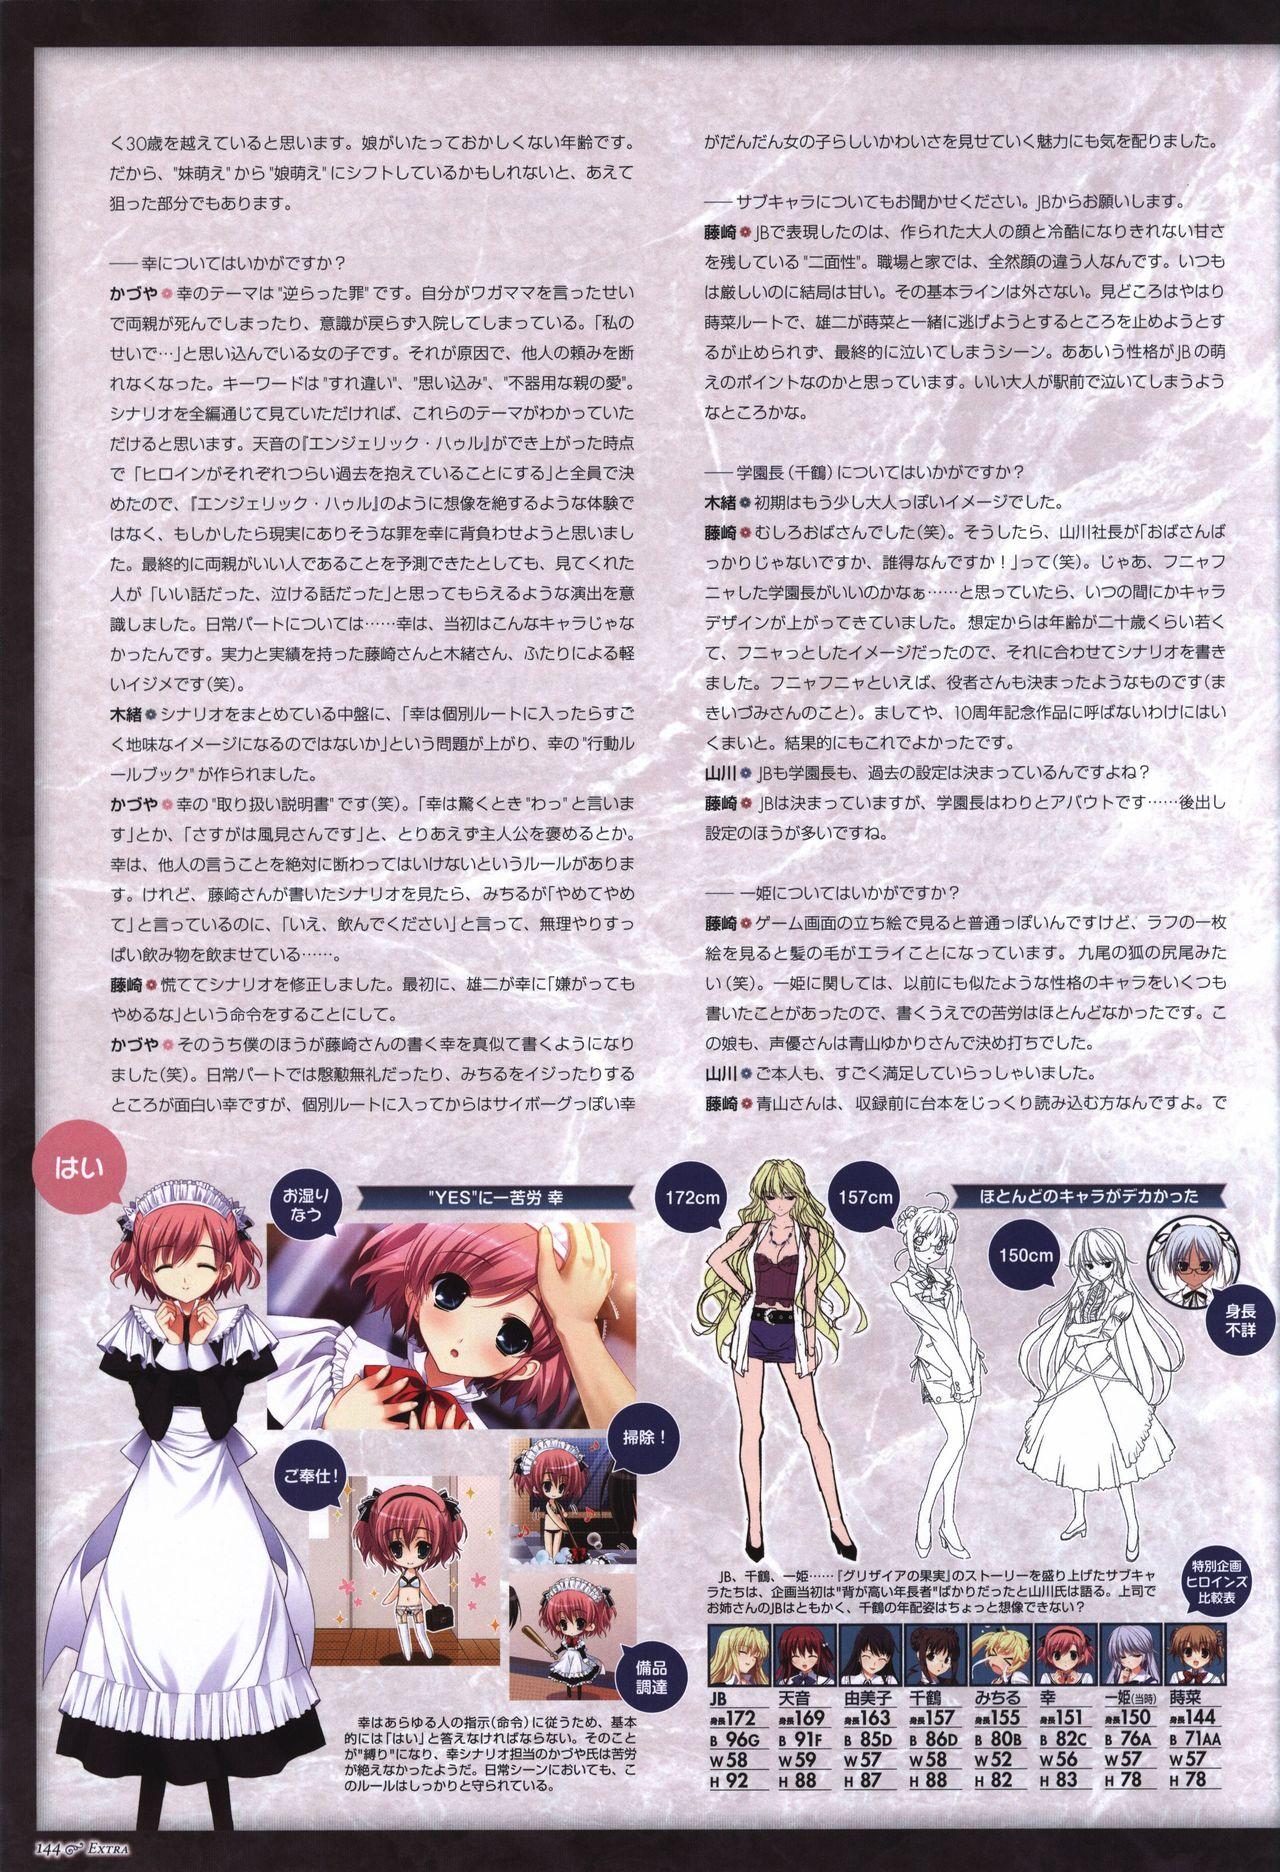 The Fruit of Grisaia Visual FanBook 144